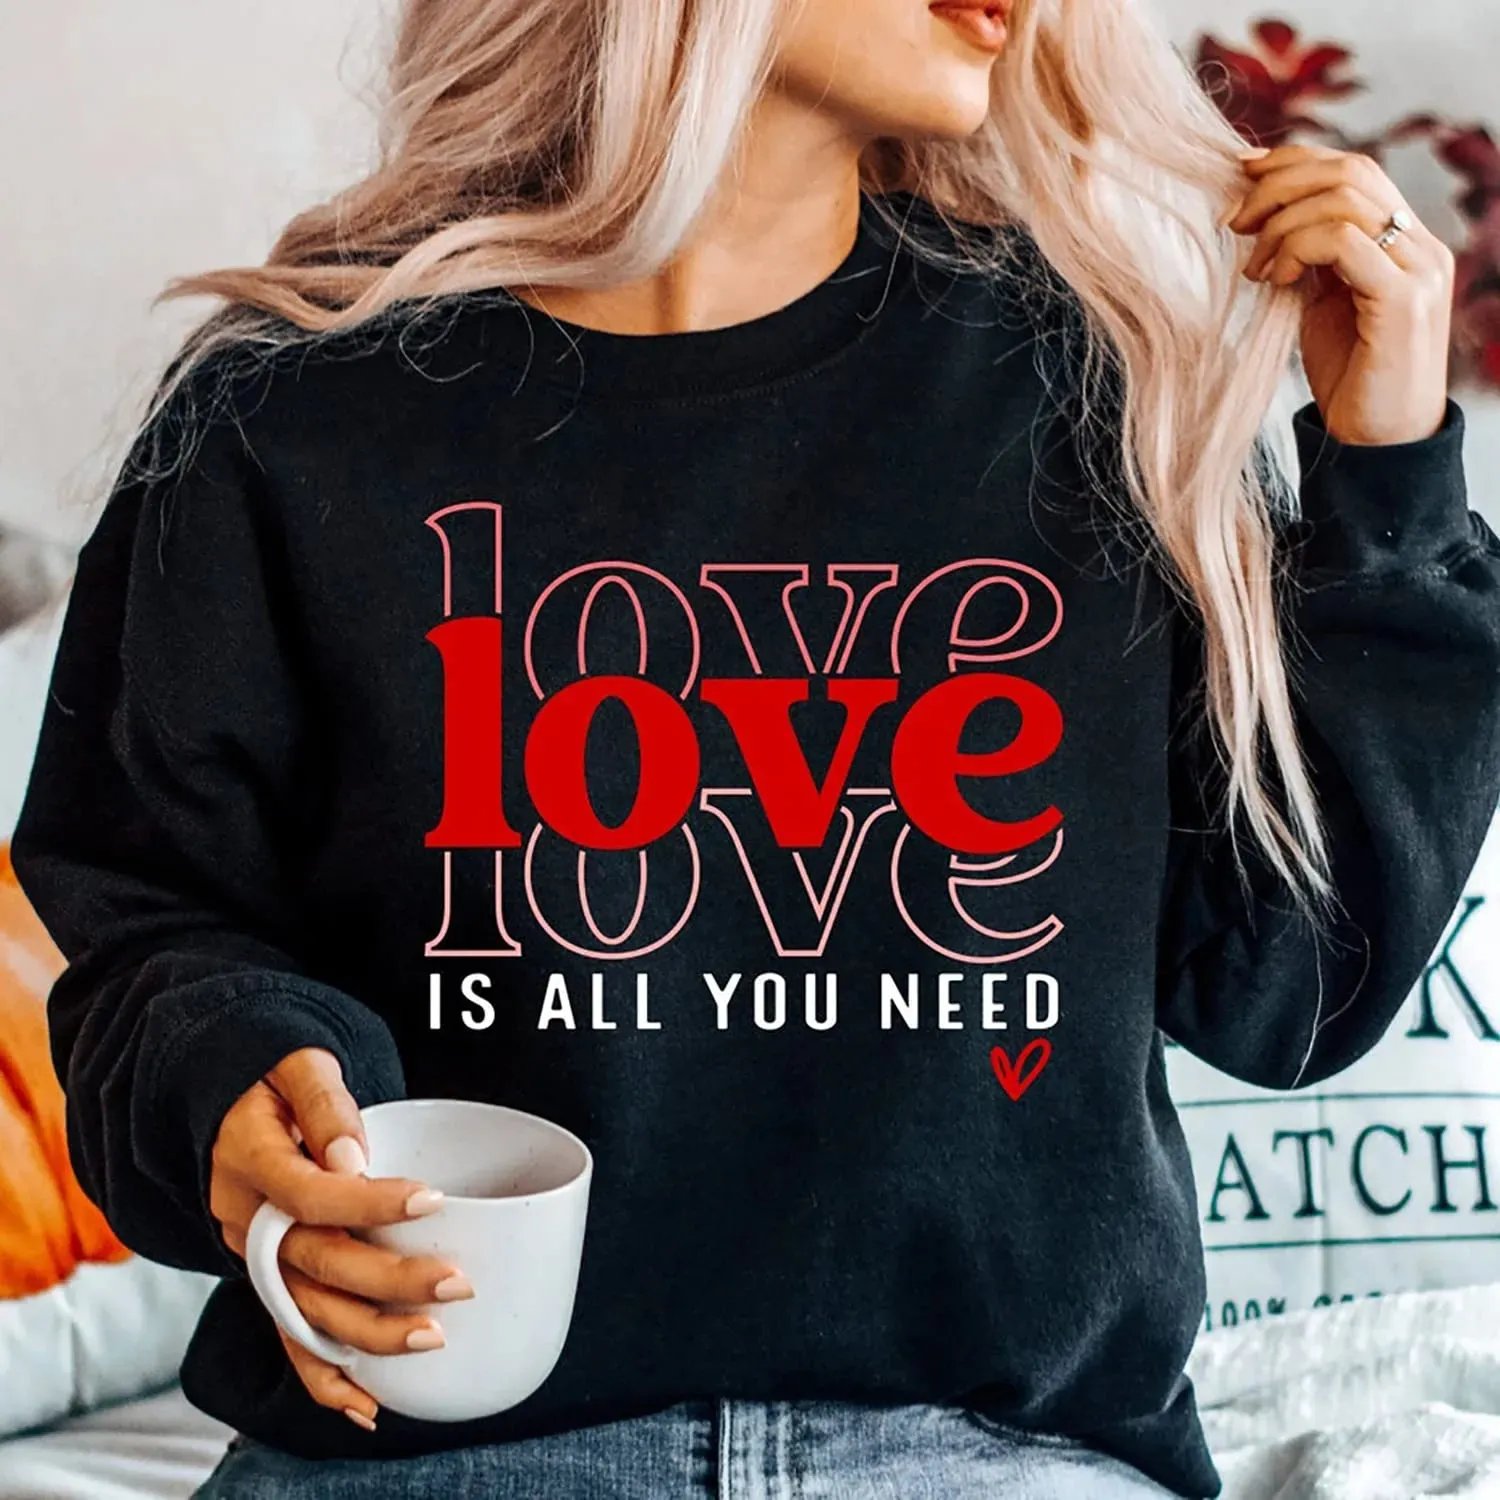 Valentine's Day Iron on Transfer Stickers T-Shirt Decals Heat Transfer Vinyl Patches Transfer Heart Love Design for Clothing